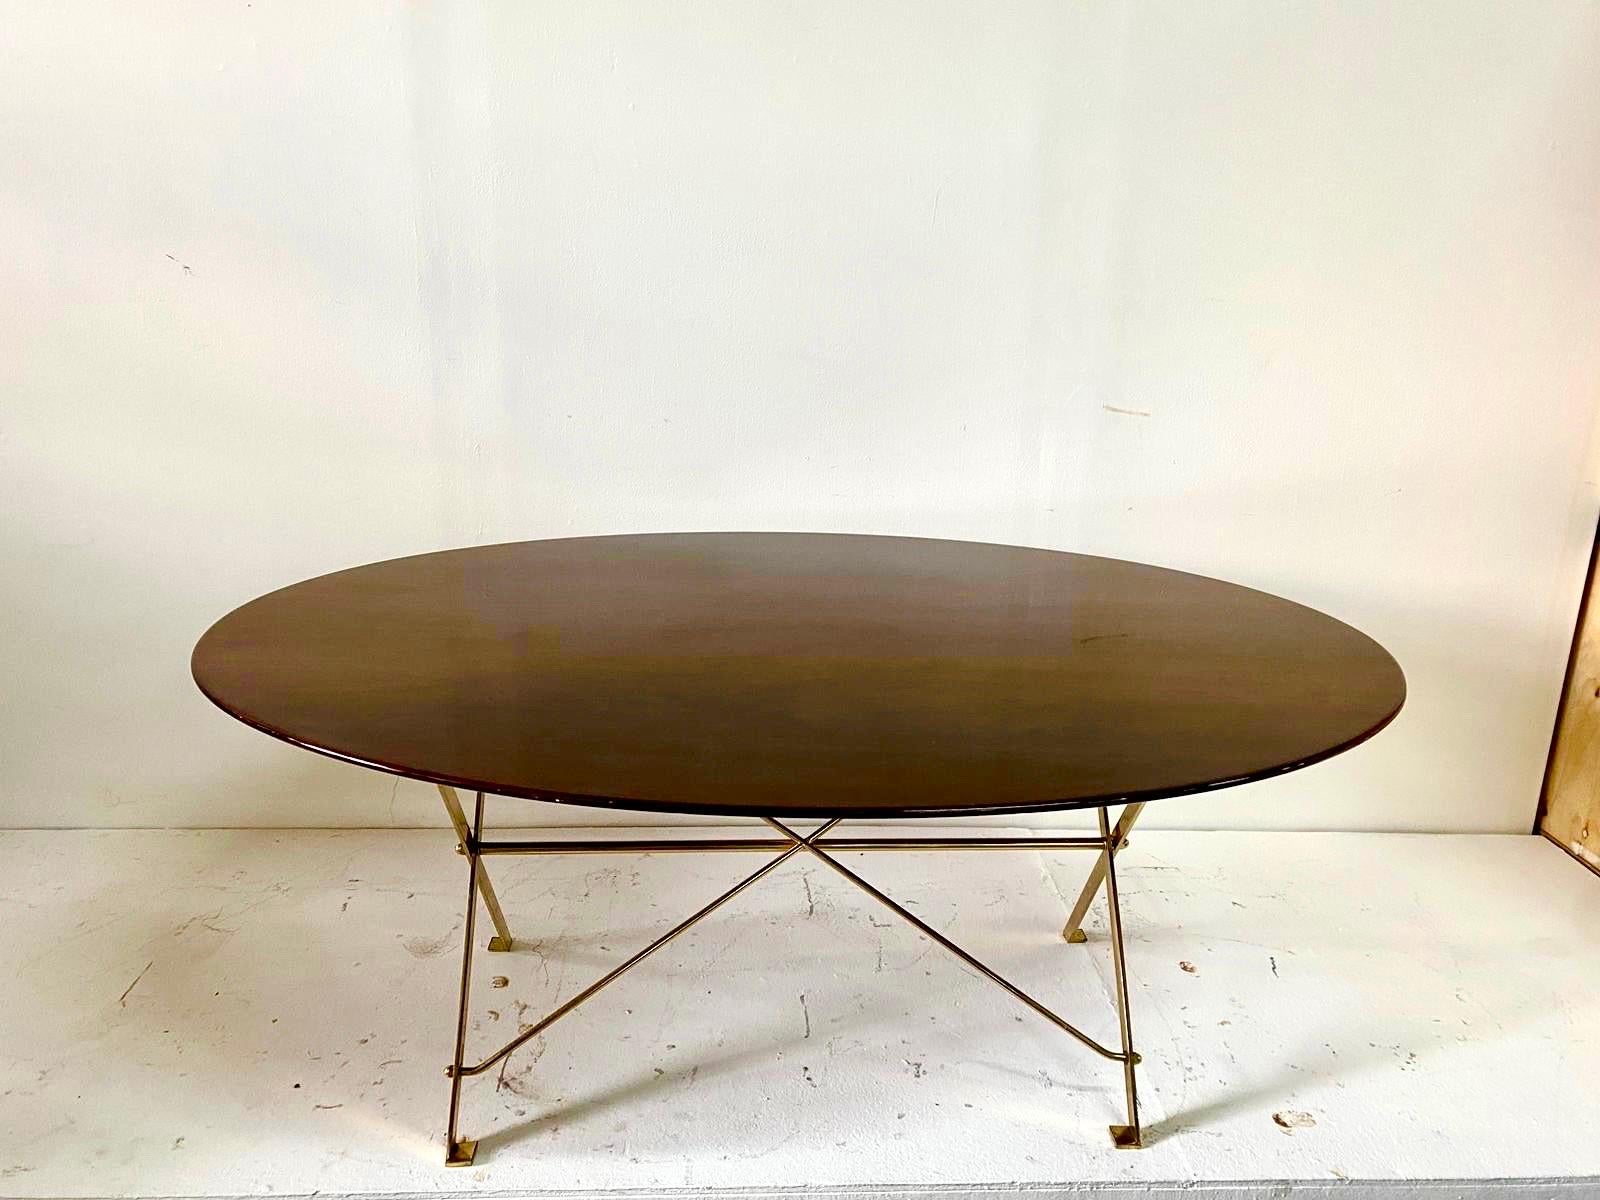 Retains original Azucena label to underside (see pics). Vintage lacquered wood and brass T3 Cavalletto Table by Caccia Dominioni for Azucena 1947. This rare and iconic table features a very heavy brass folding structure with an elegant and thin